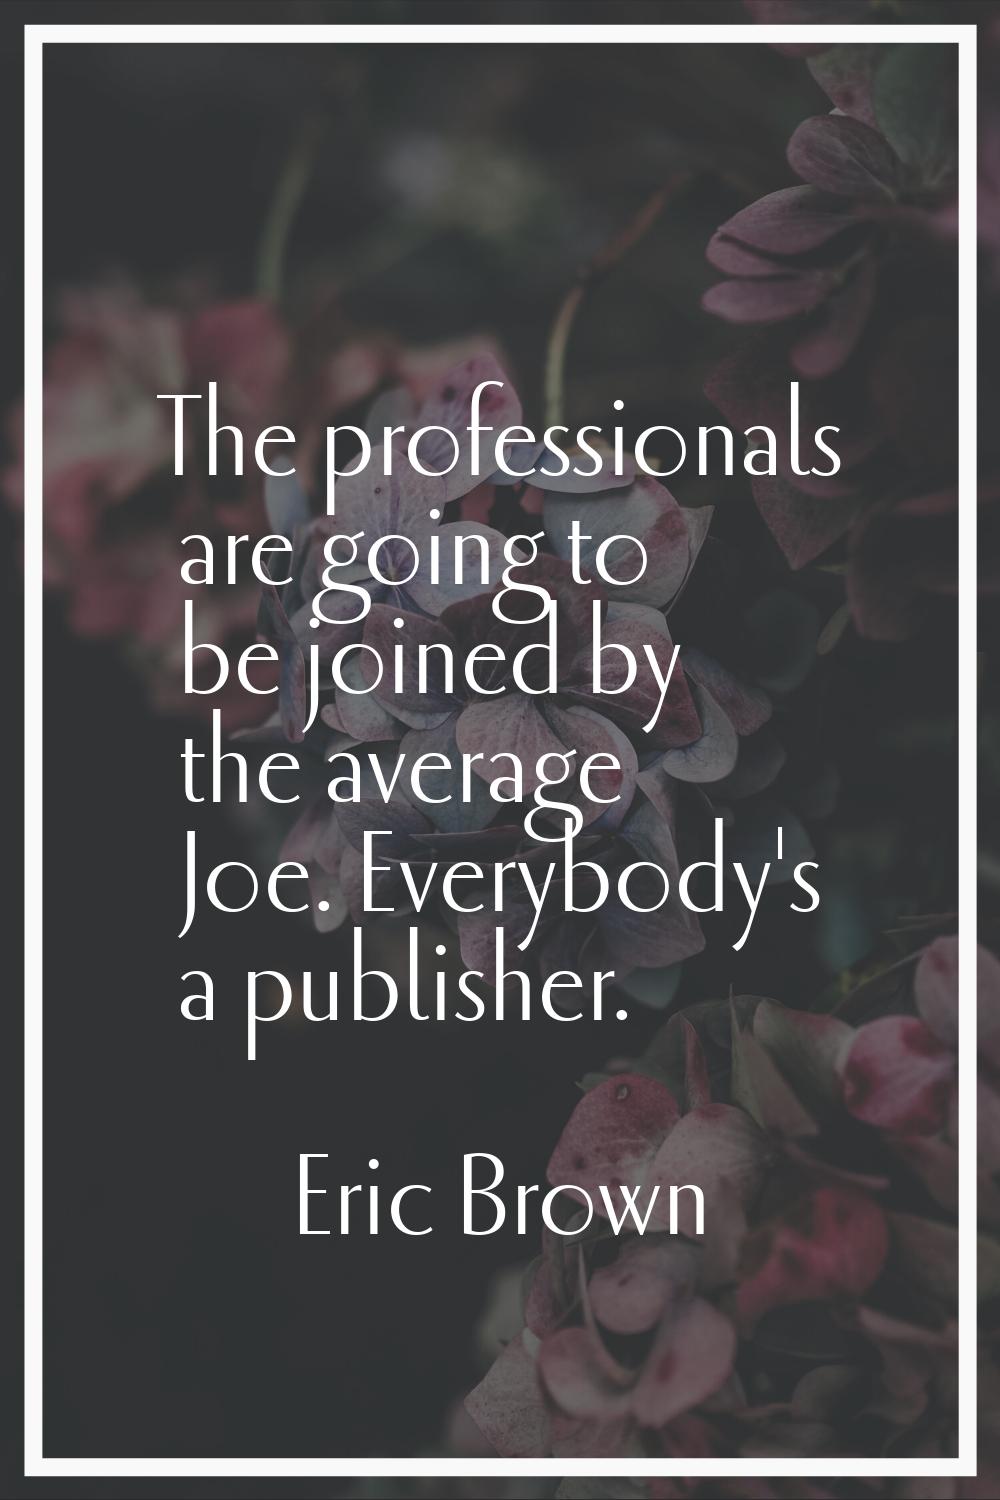 The professionals are going to be joined by the average Joe. Everybody's a publisher.